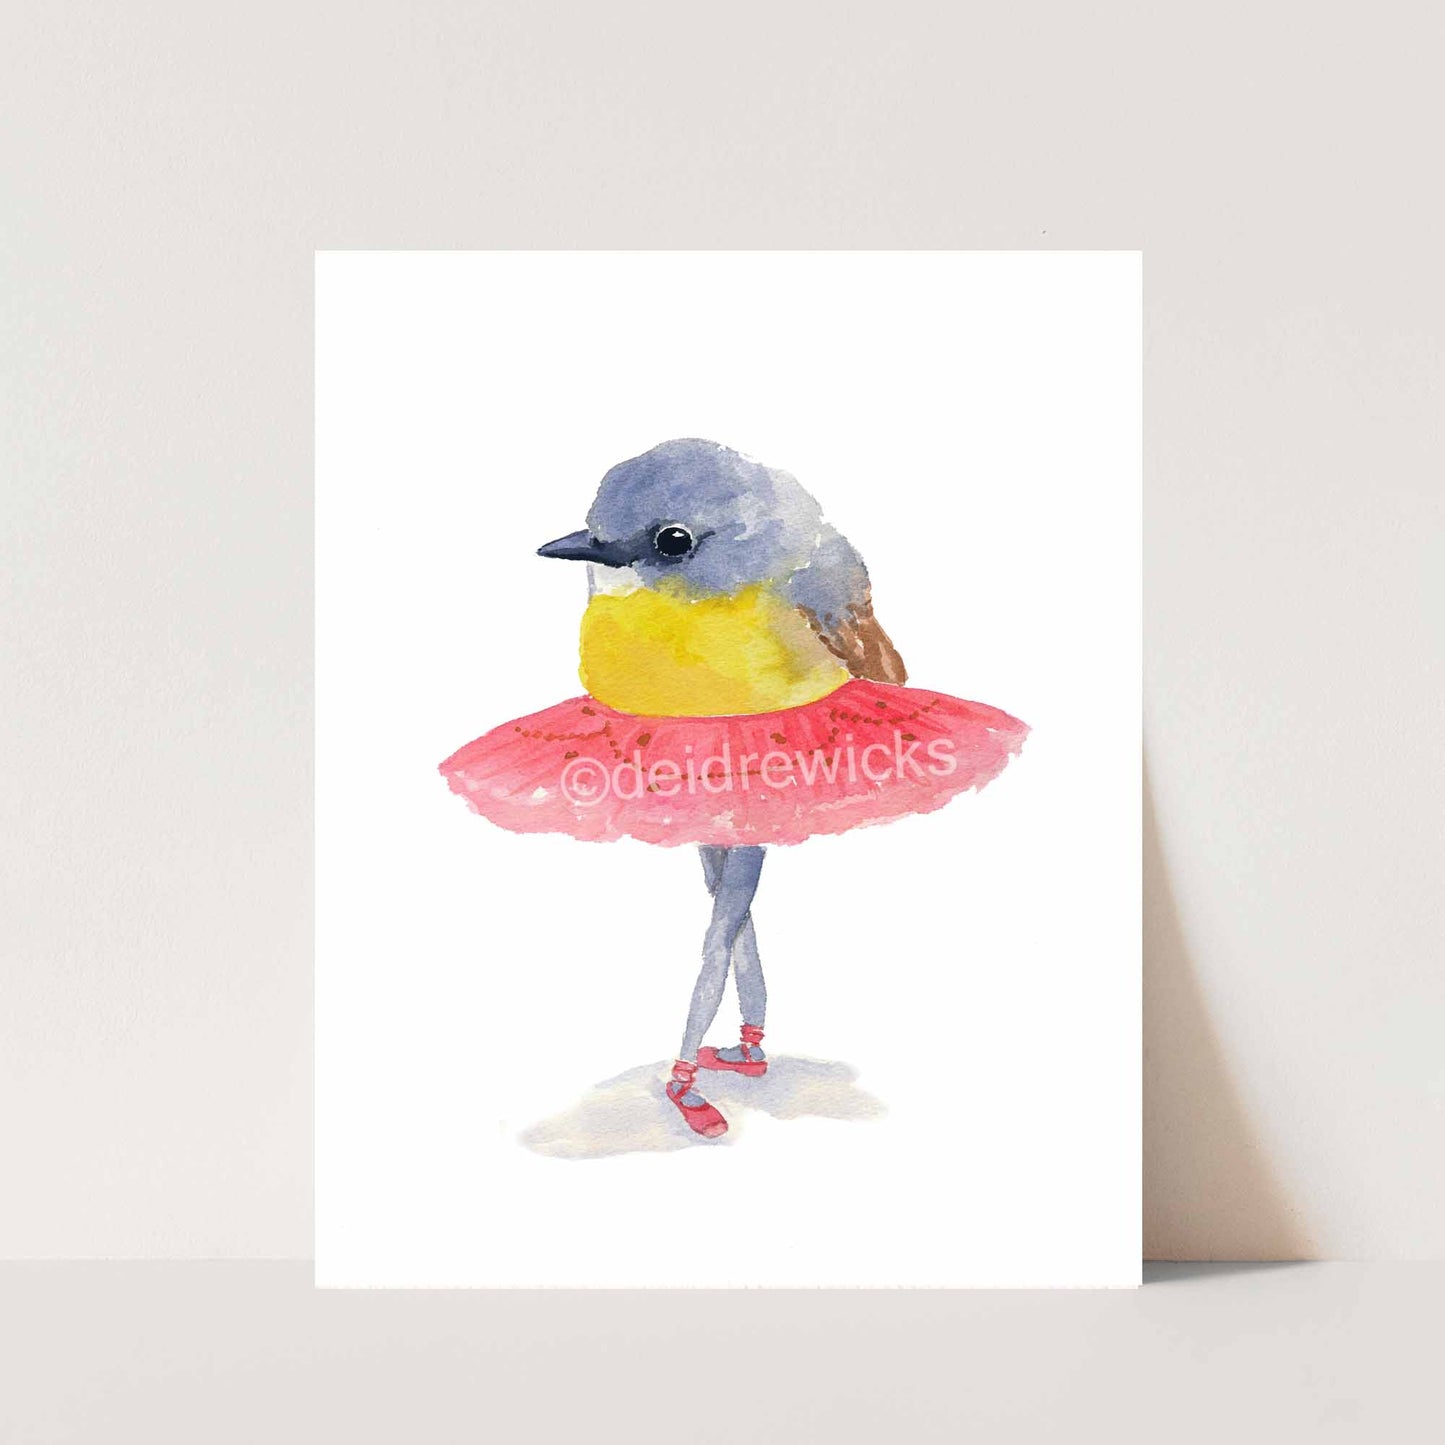 Watercolor print of a ballet bird wearing a pink tutu and pointe shoes. By artist Deidre Wicks